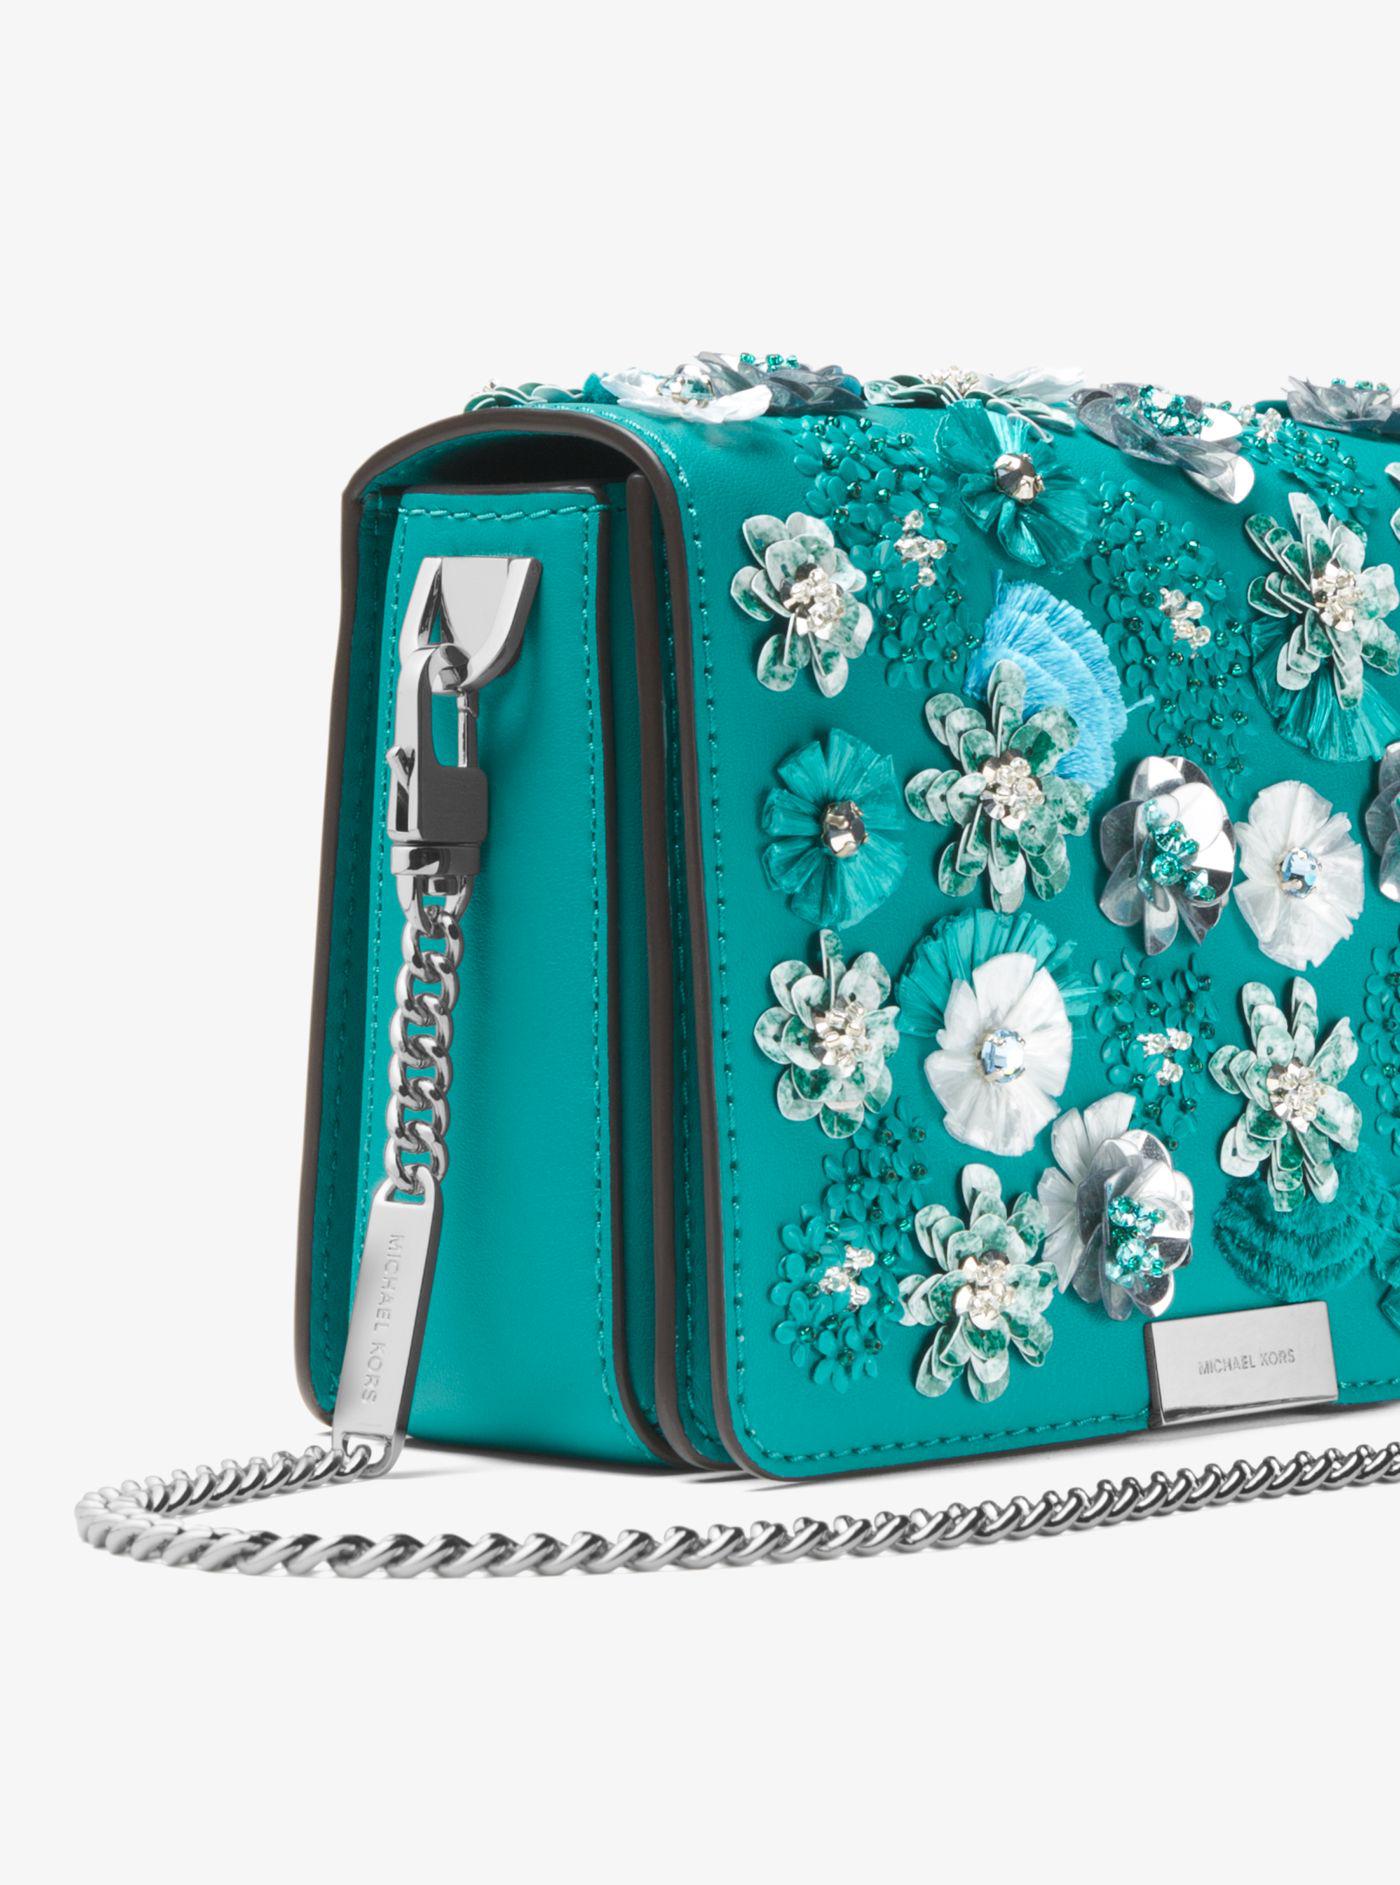 michael kors jade floral sequined leather clutch